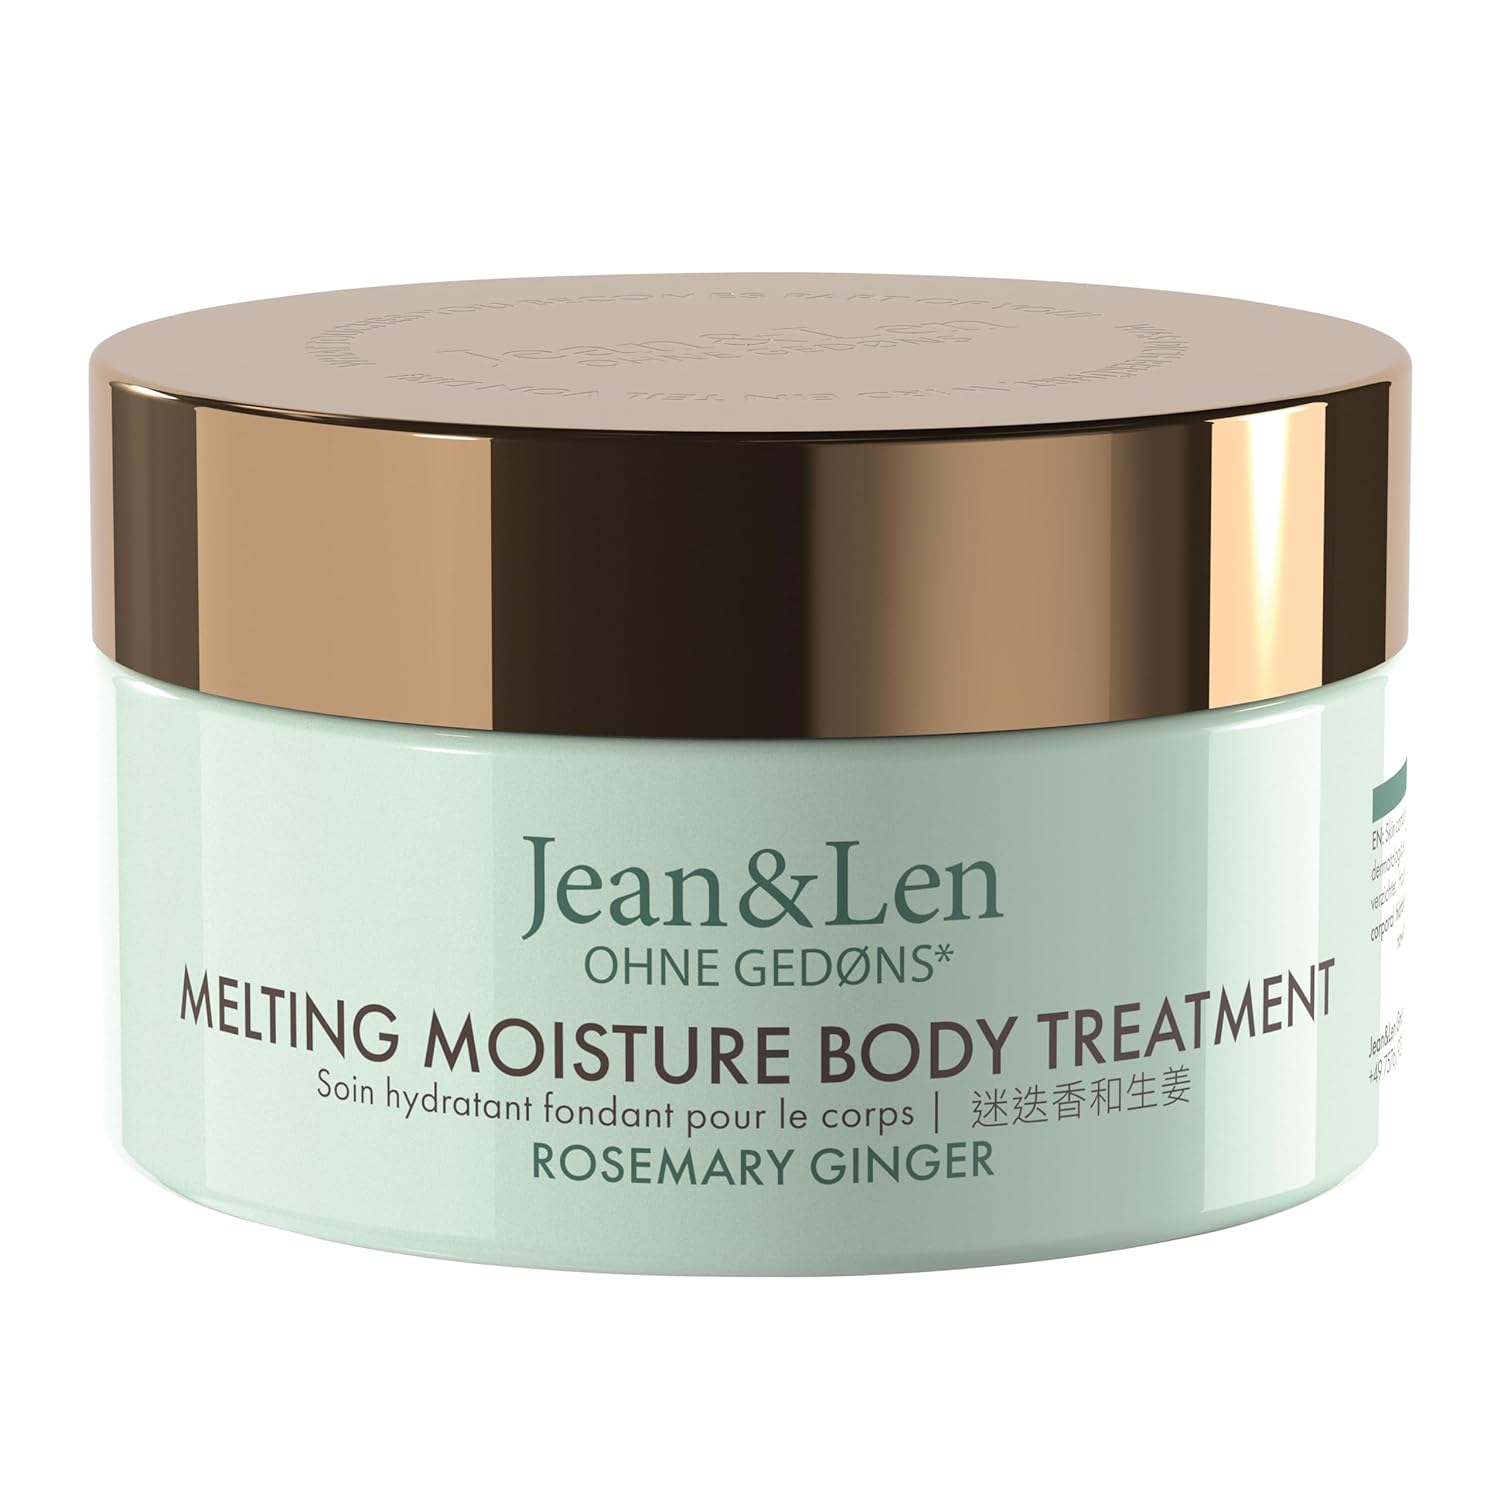 Jean & Len Melting Moisture Body Treatment Rosemary & Ginger, For A Scented Care Result, For Normal Skin, High-Quality Jar, Nourishing Body Butter, Parabens & Silicone Free, 200 ml